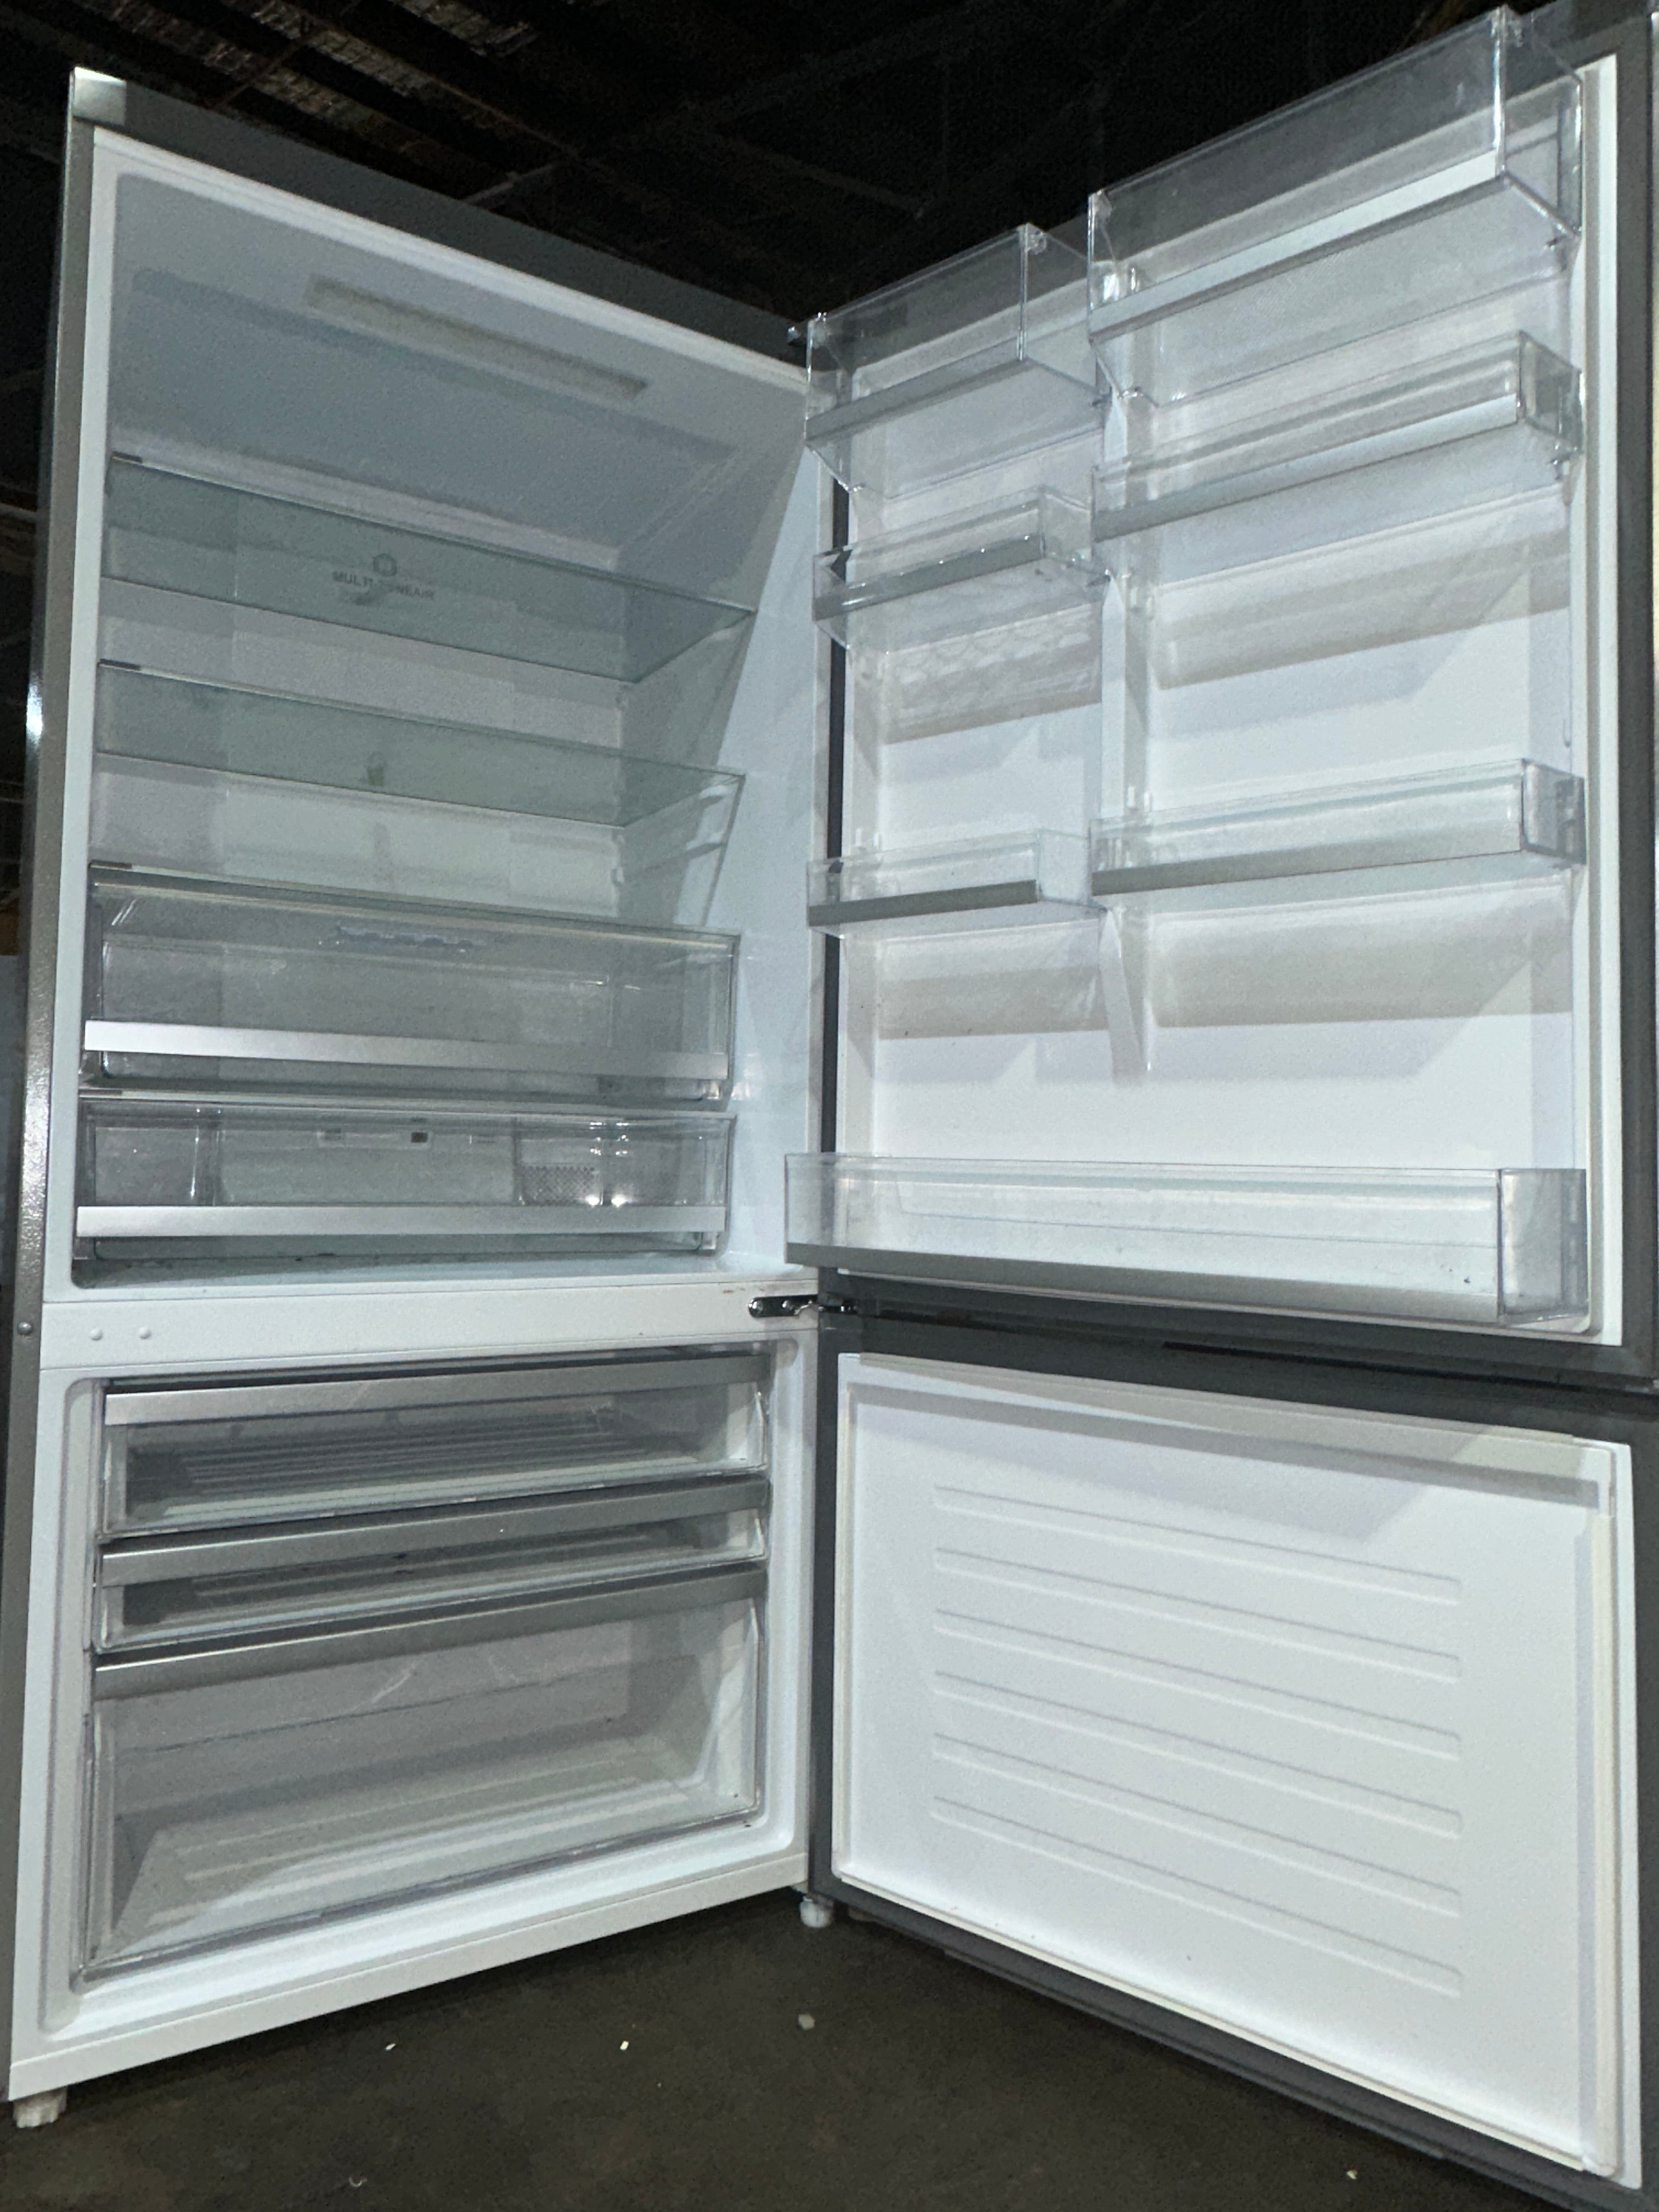 Haier HRF520BS Stainless 493 L Bottom Mount  Refrigerator - Sydney Appliances Outlet